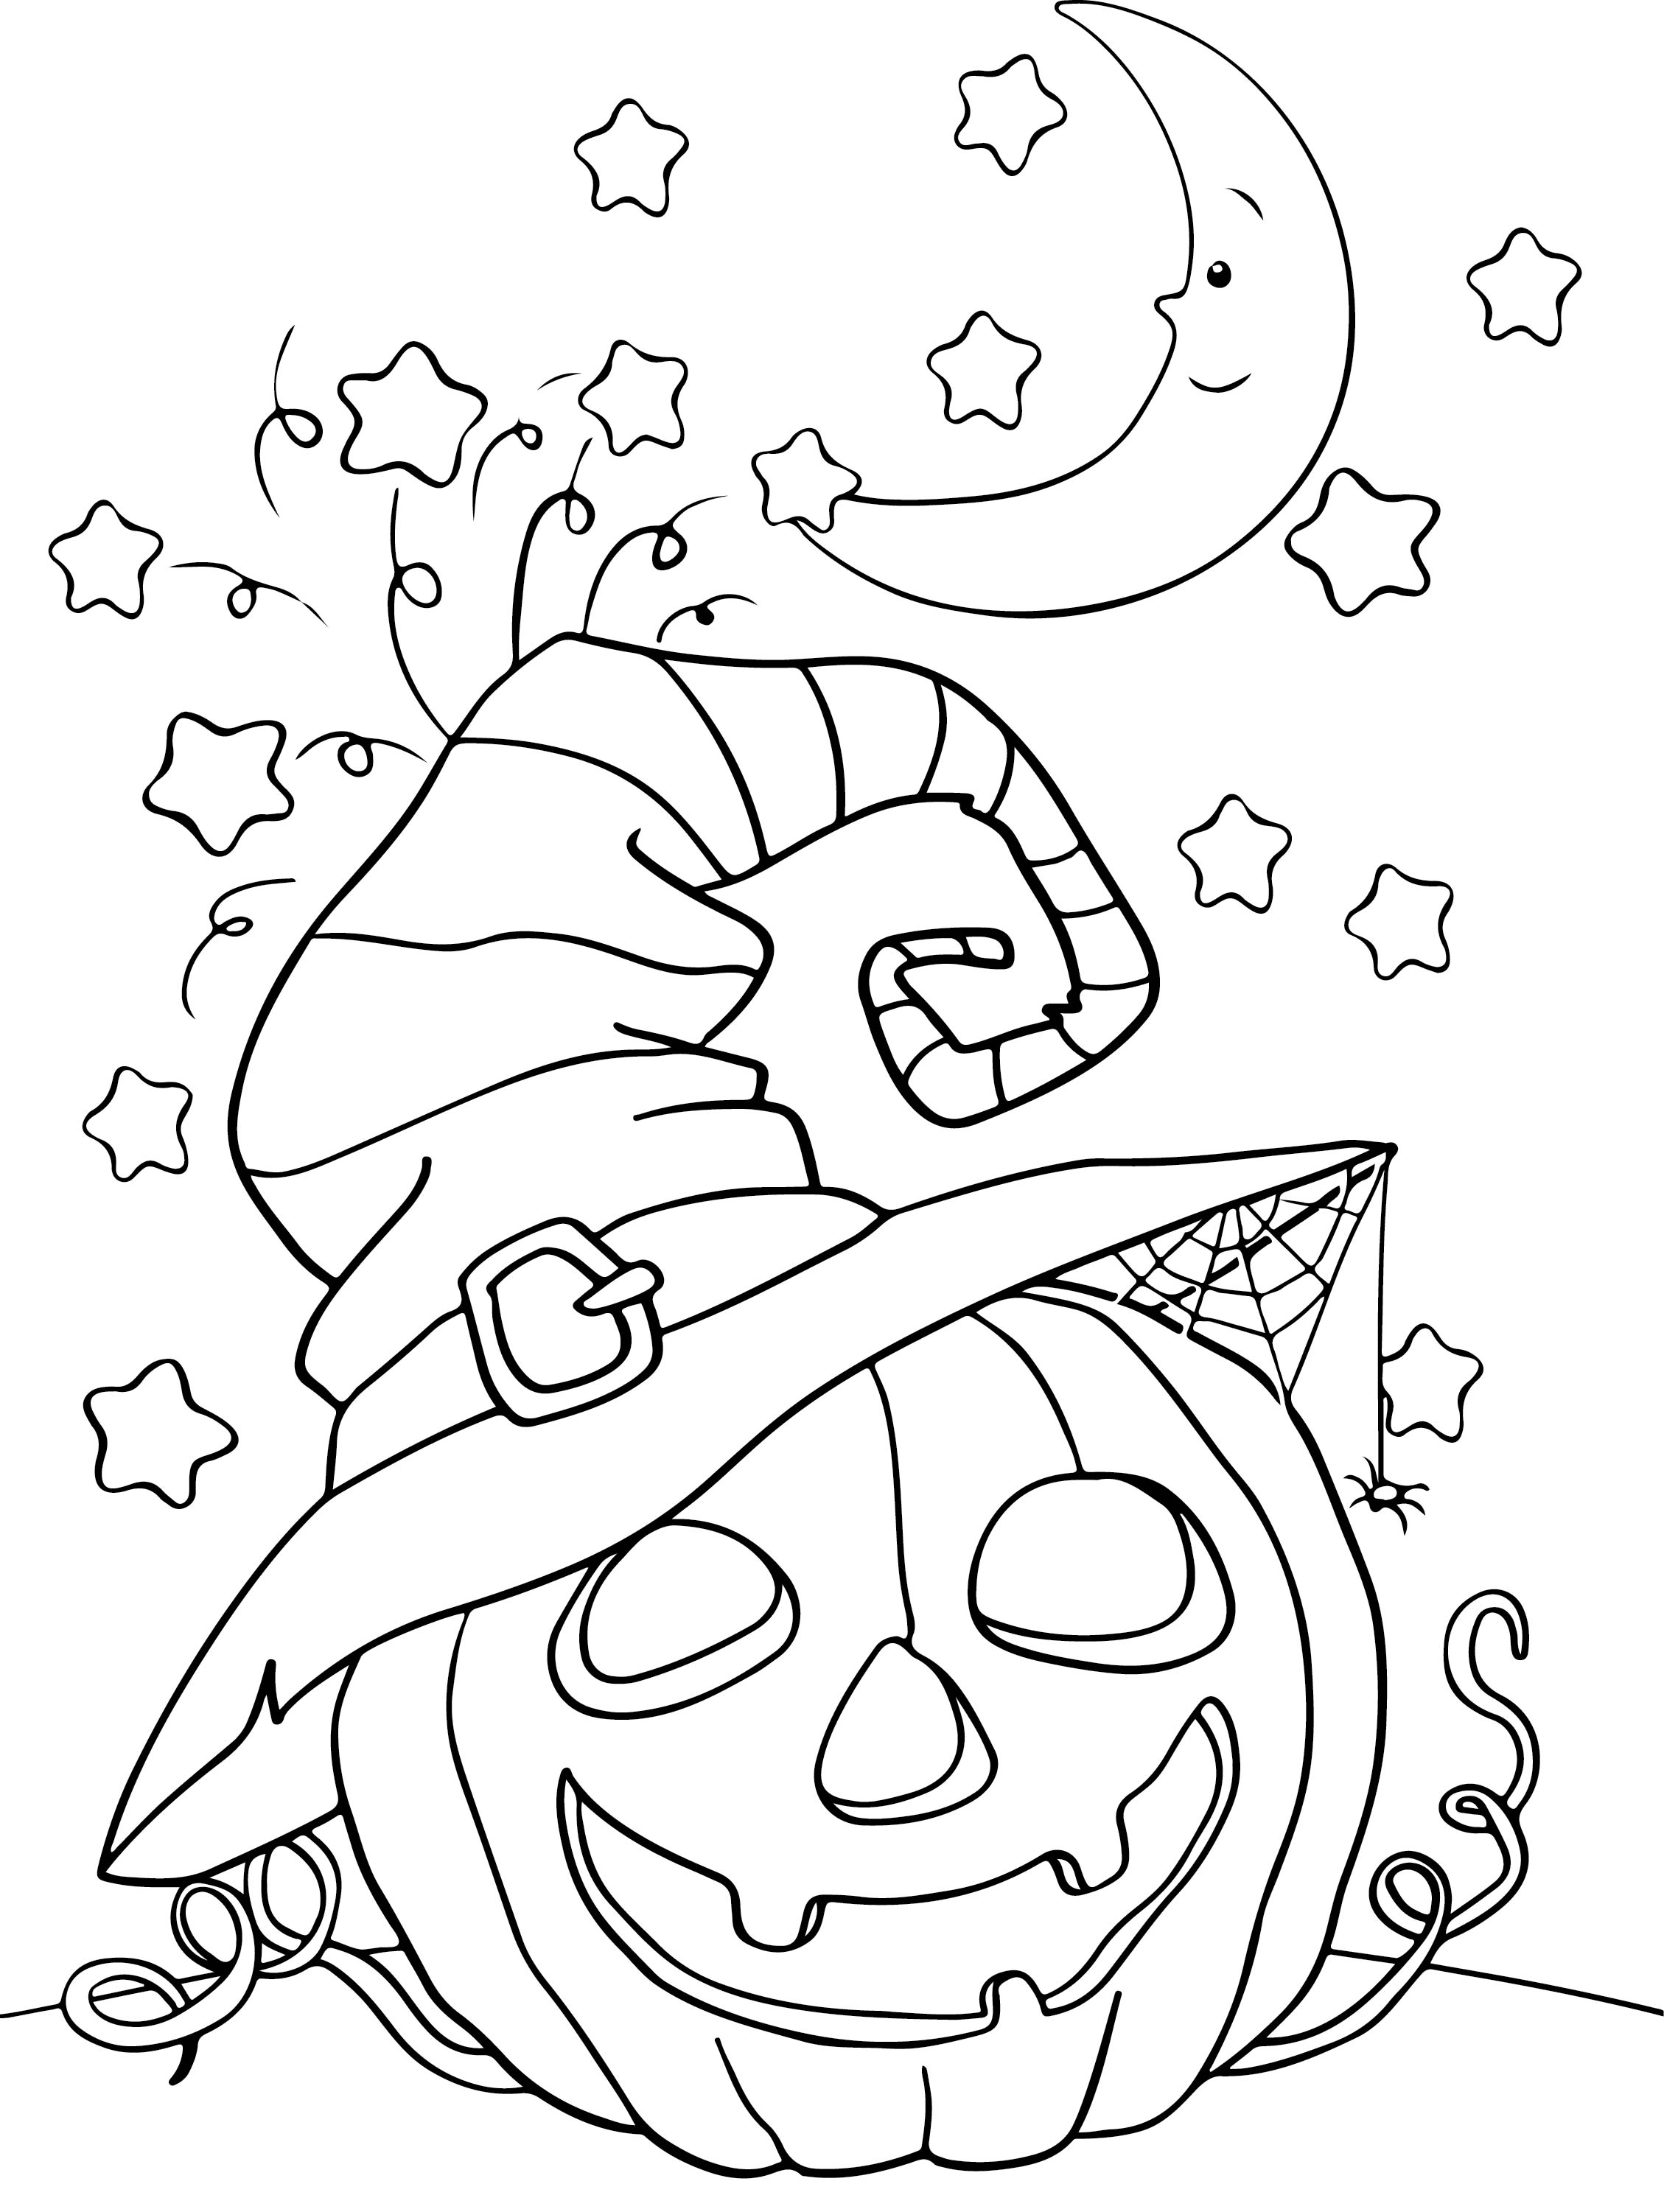 halloween-coloring-pages-for-teachers-free-download-gmbar-co